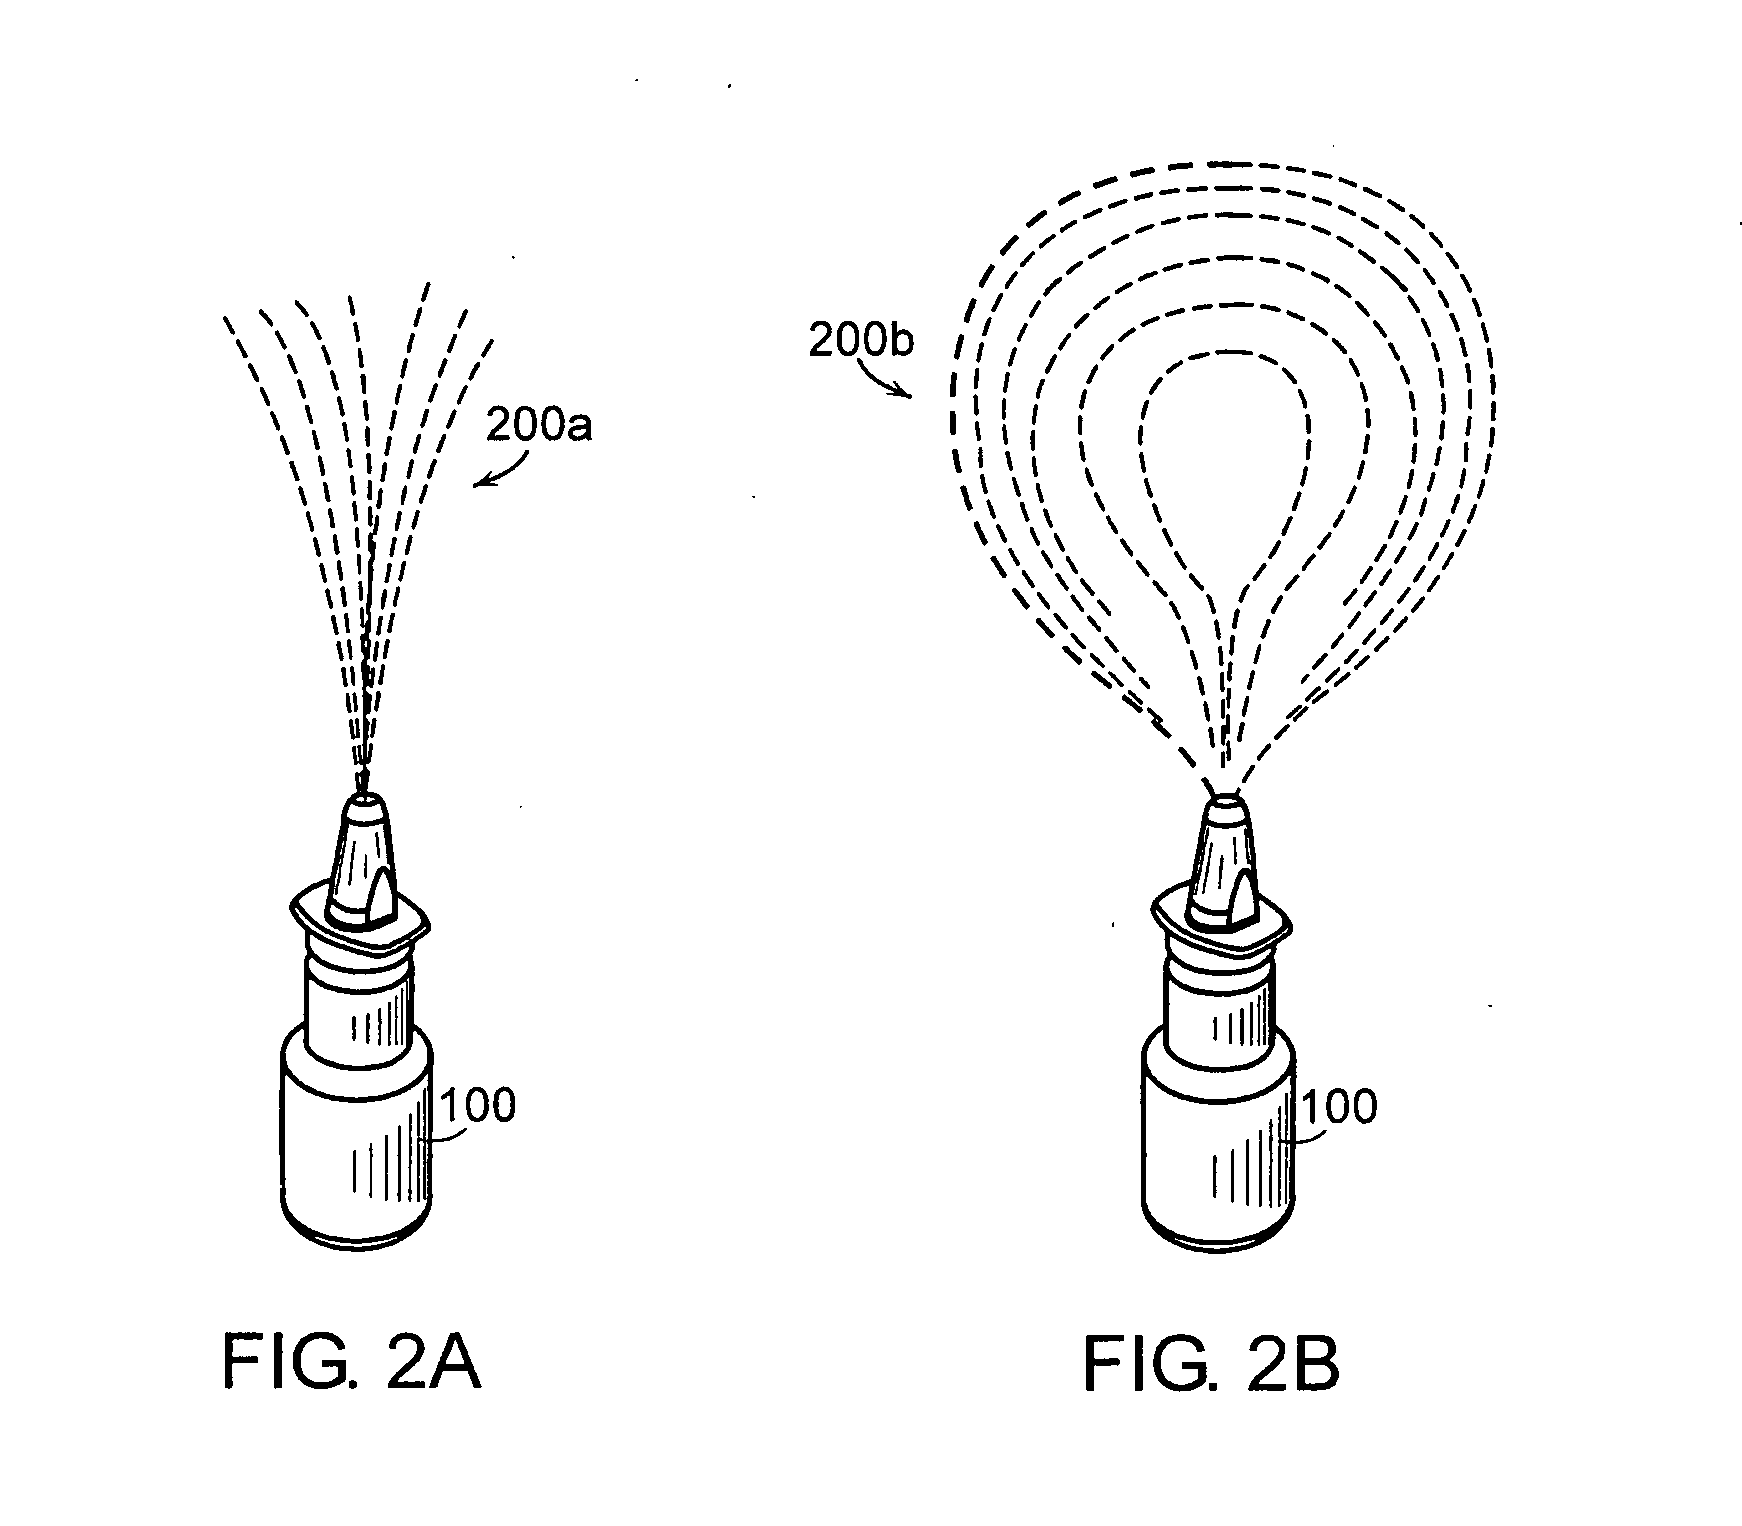 Method and apparatus for measuring manual actuation of spray devices